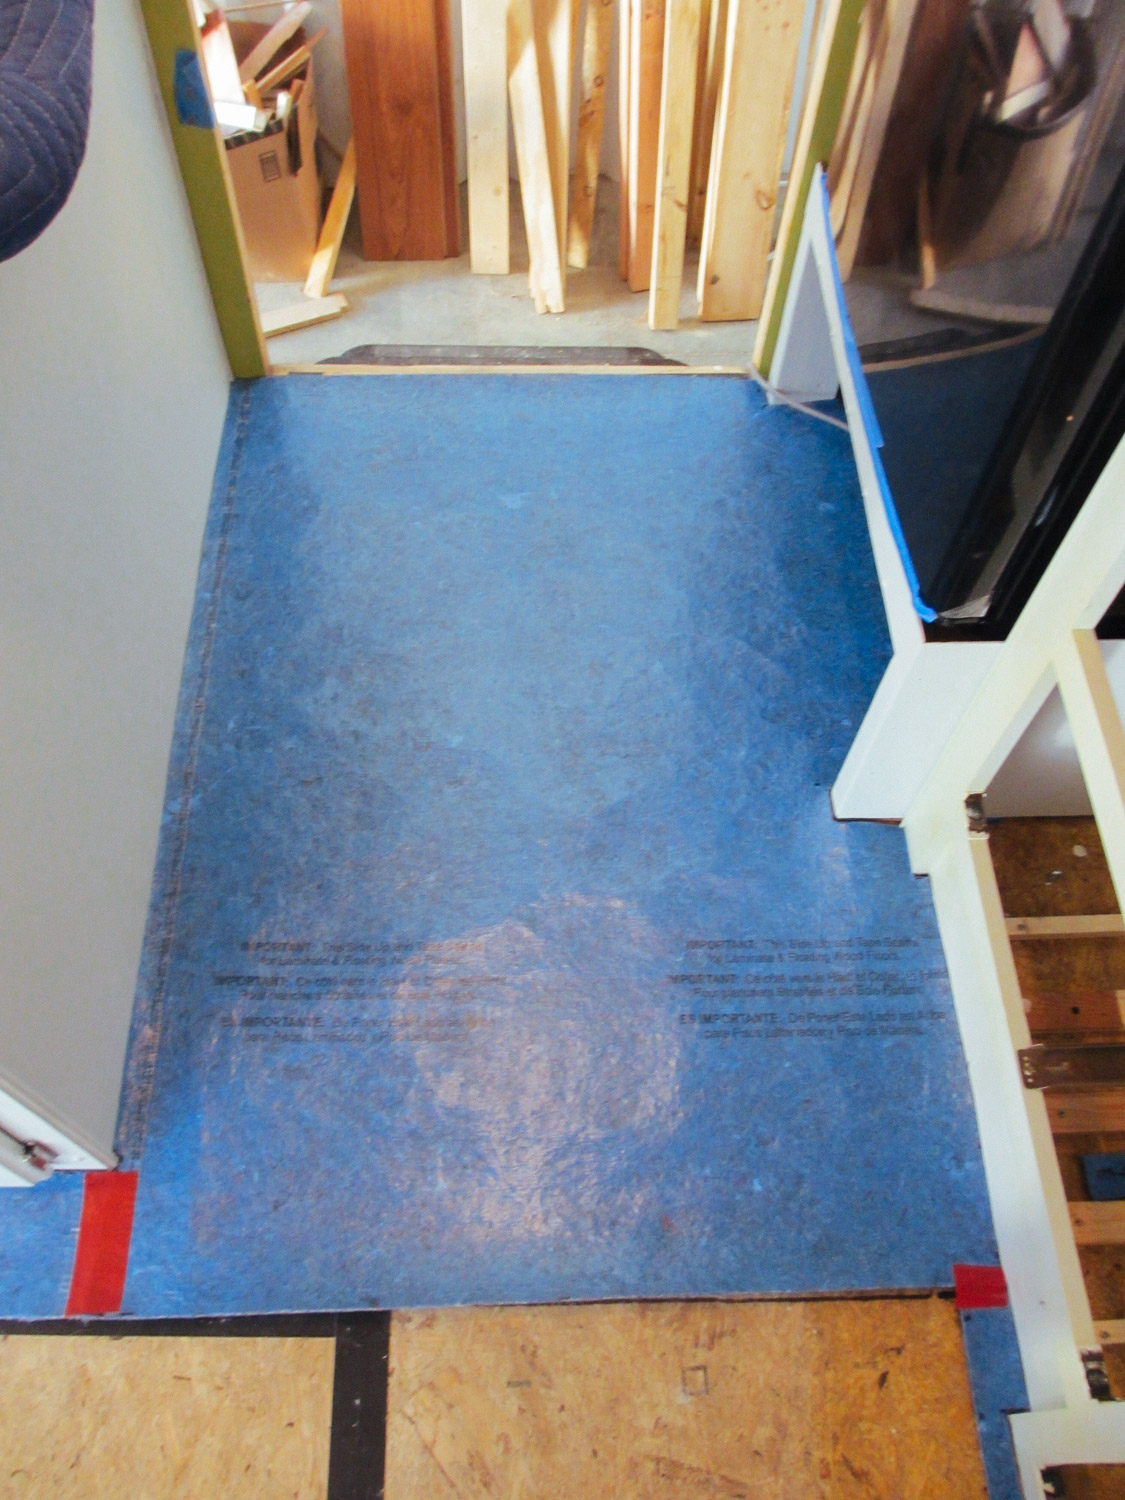  Underlayment was placed on top of the subfloor in preparation for the laminate floor. 